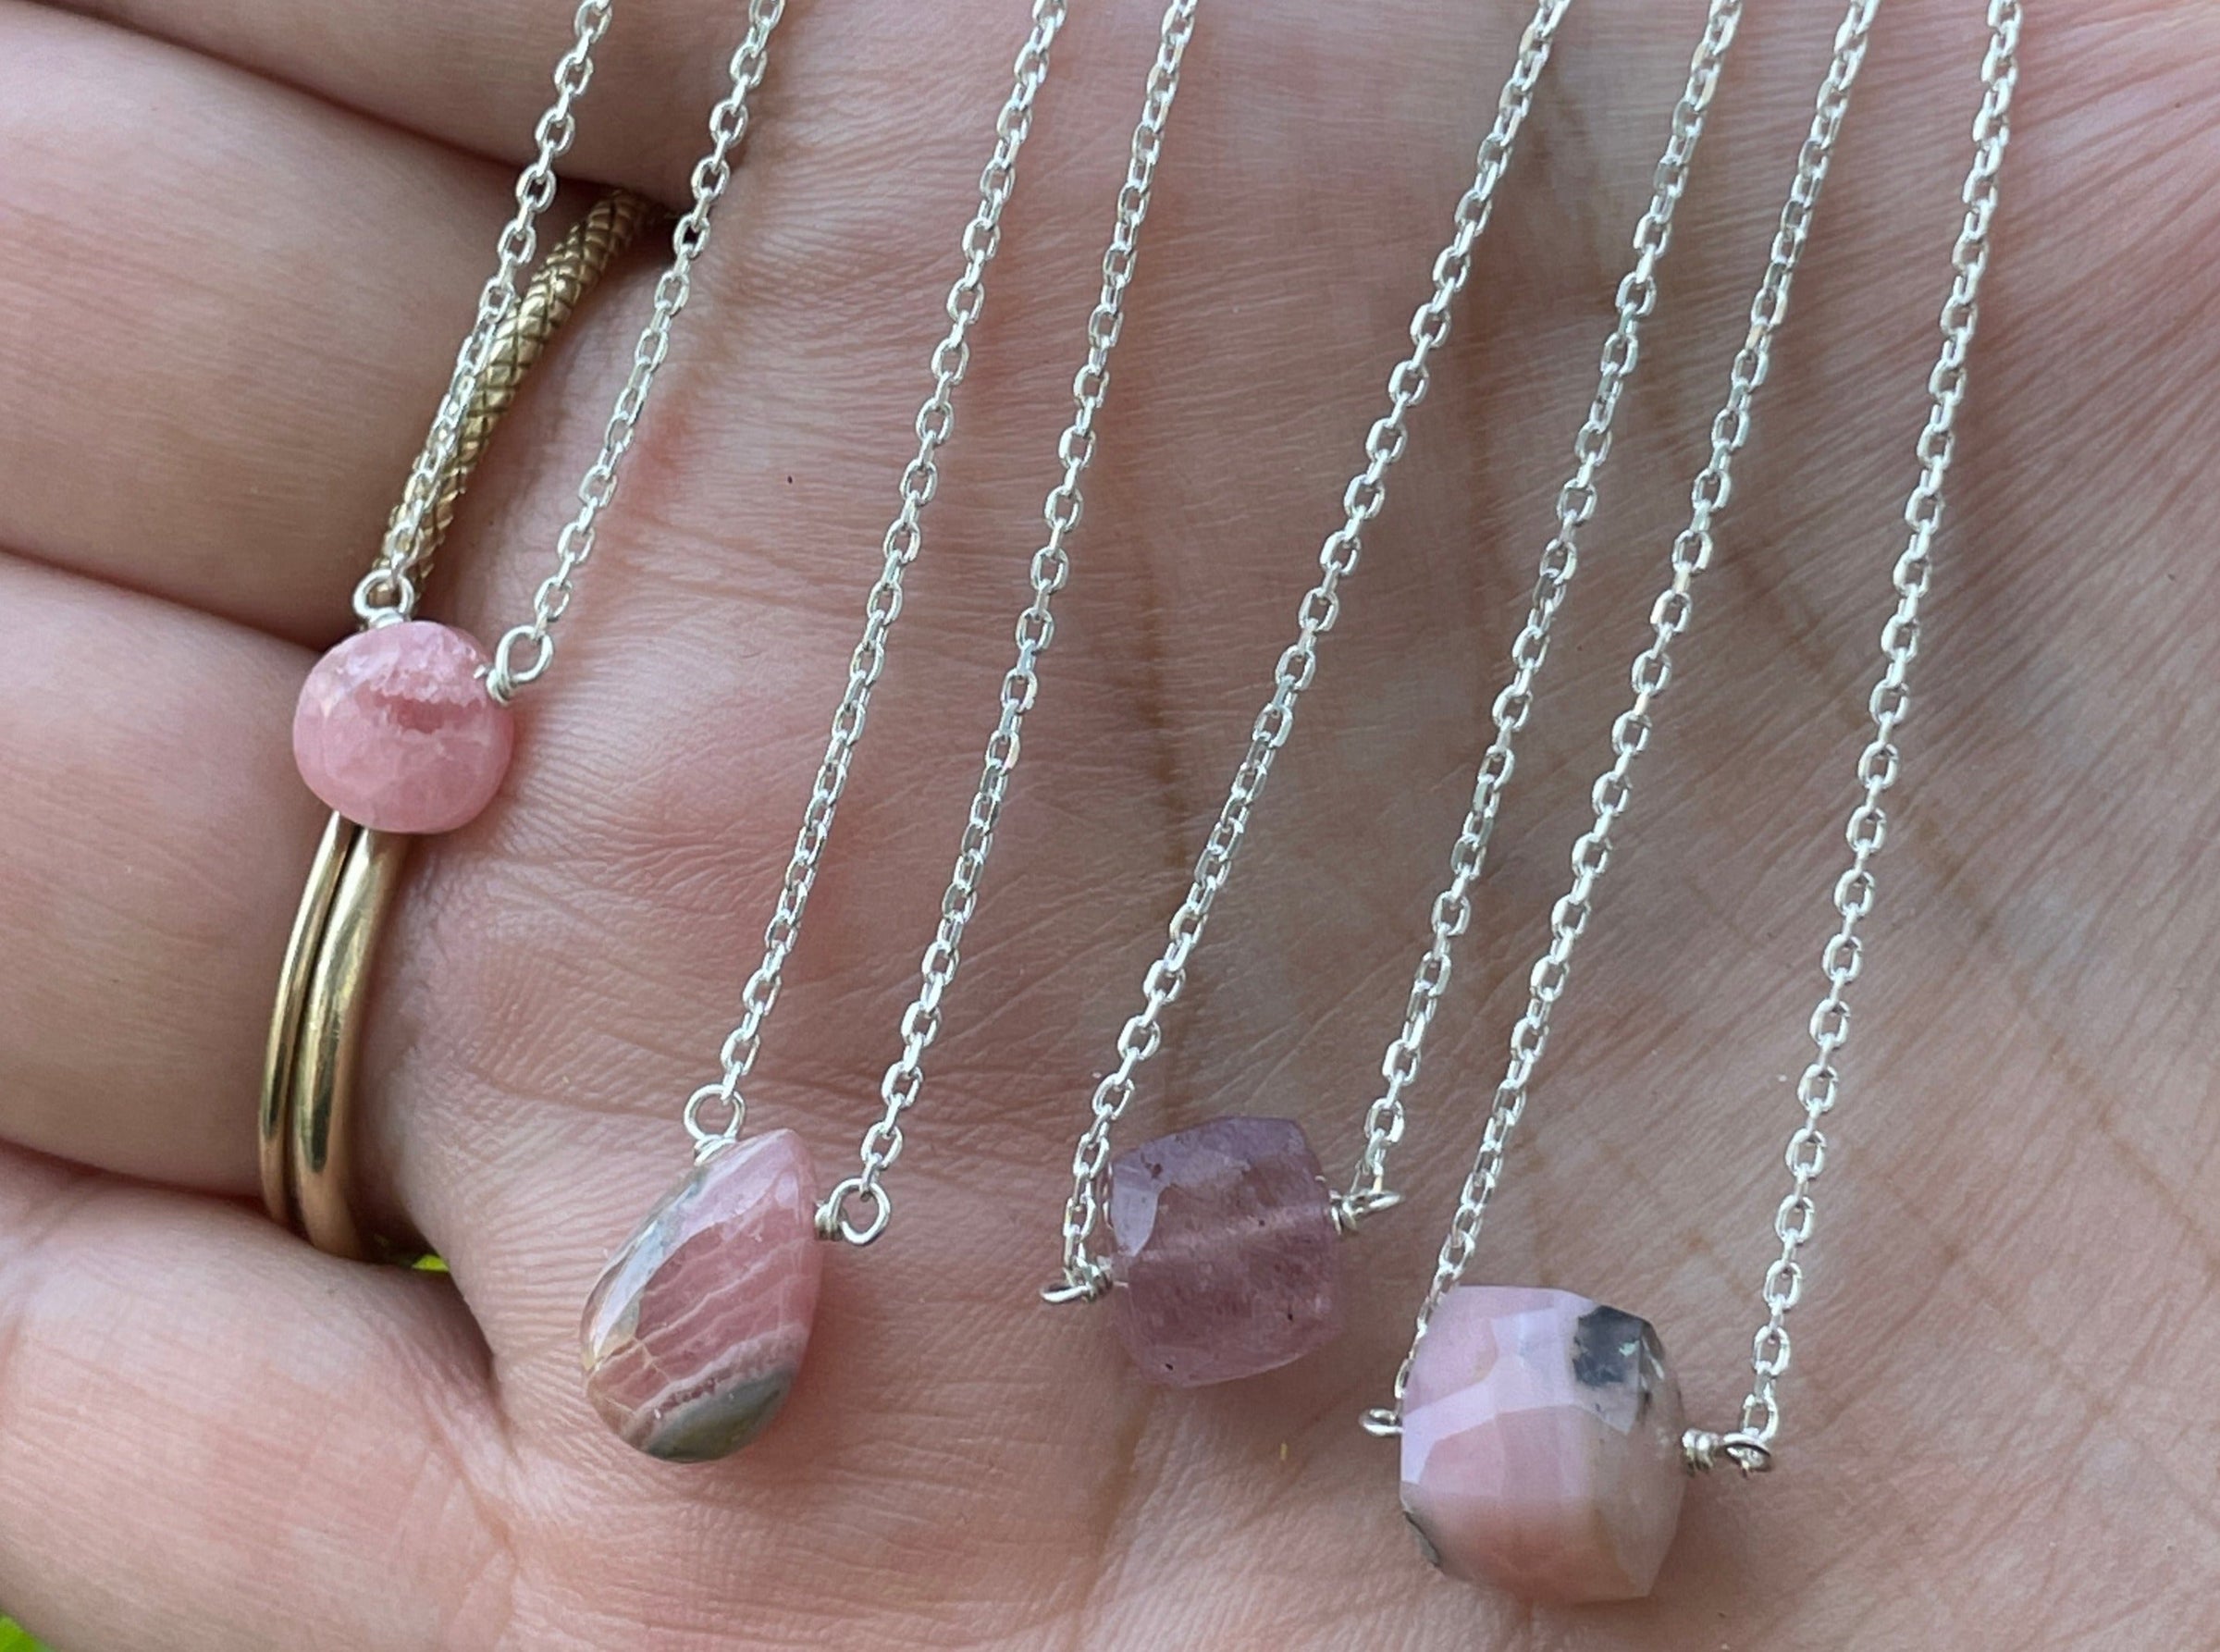 Rhodochrosite Drop Necklace - sterling silver or gold filled | Little Rock Collection necklace Amanda K Lockrow